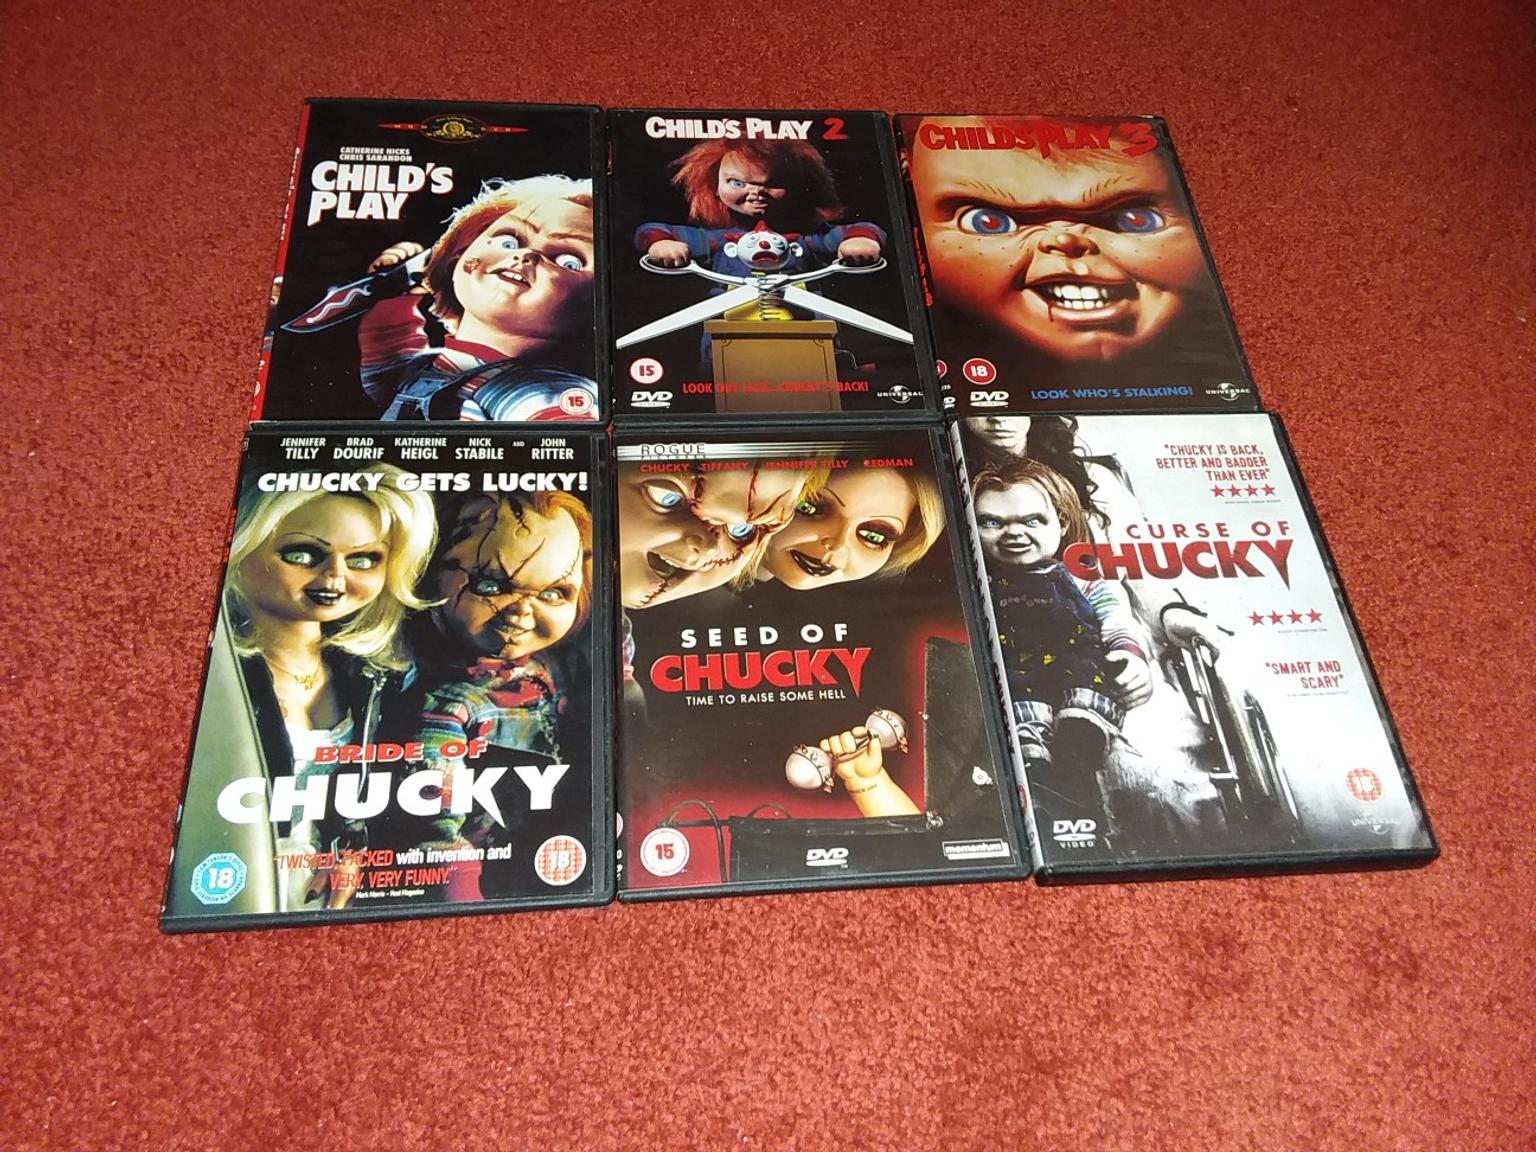 CHILD'S PLAY / CHUCKY COMPLETE DVD COLLECTION in SA5 Swansea for £30.00 for  sale | Shpock